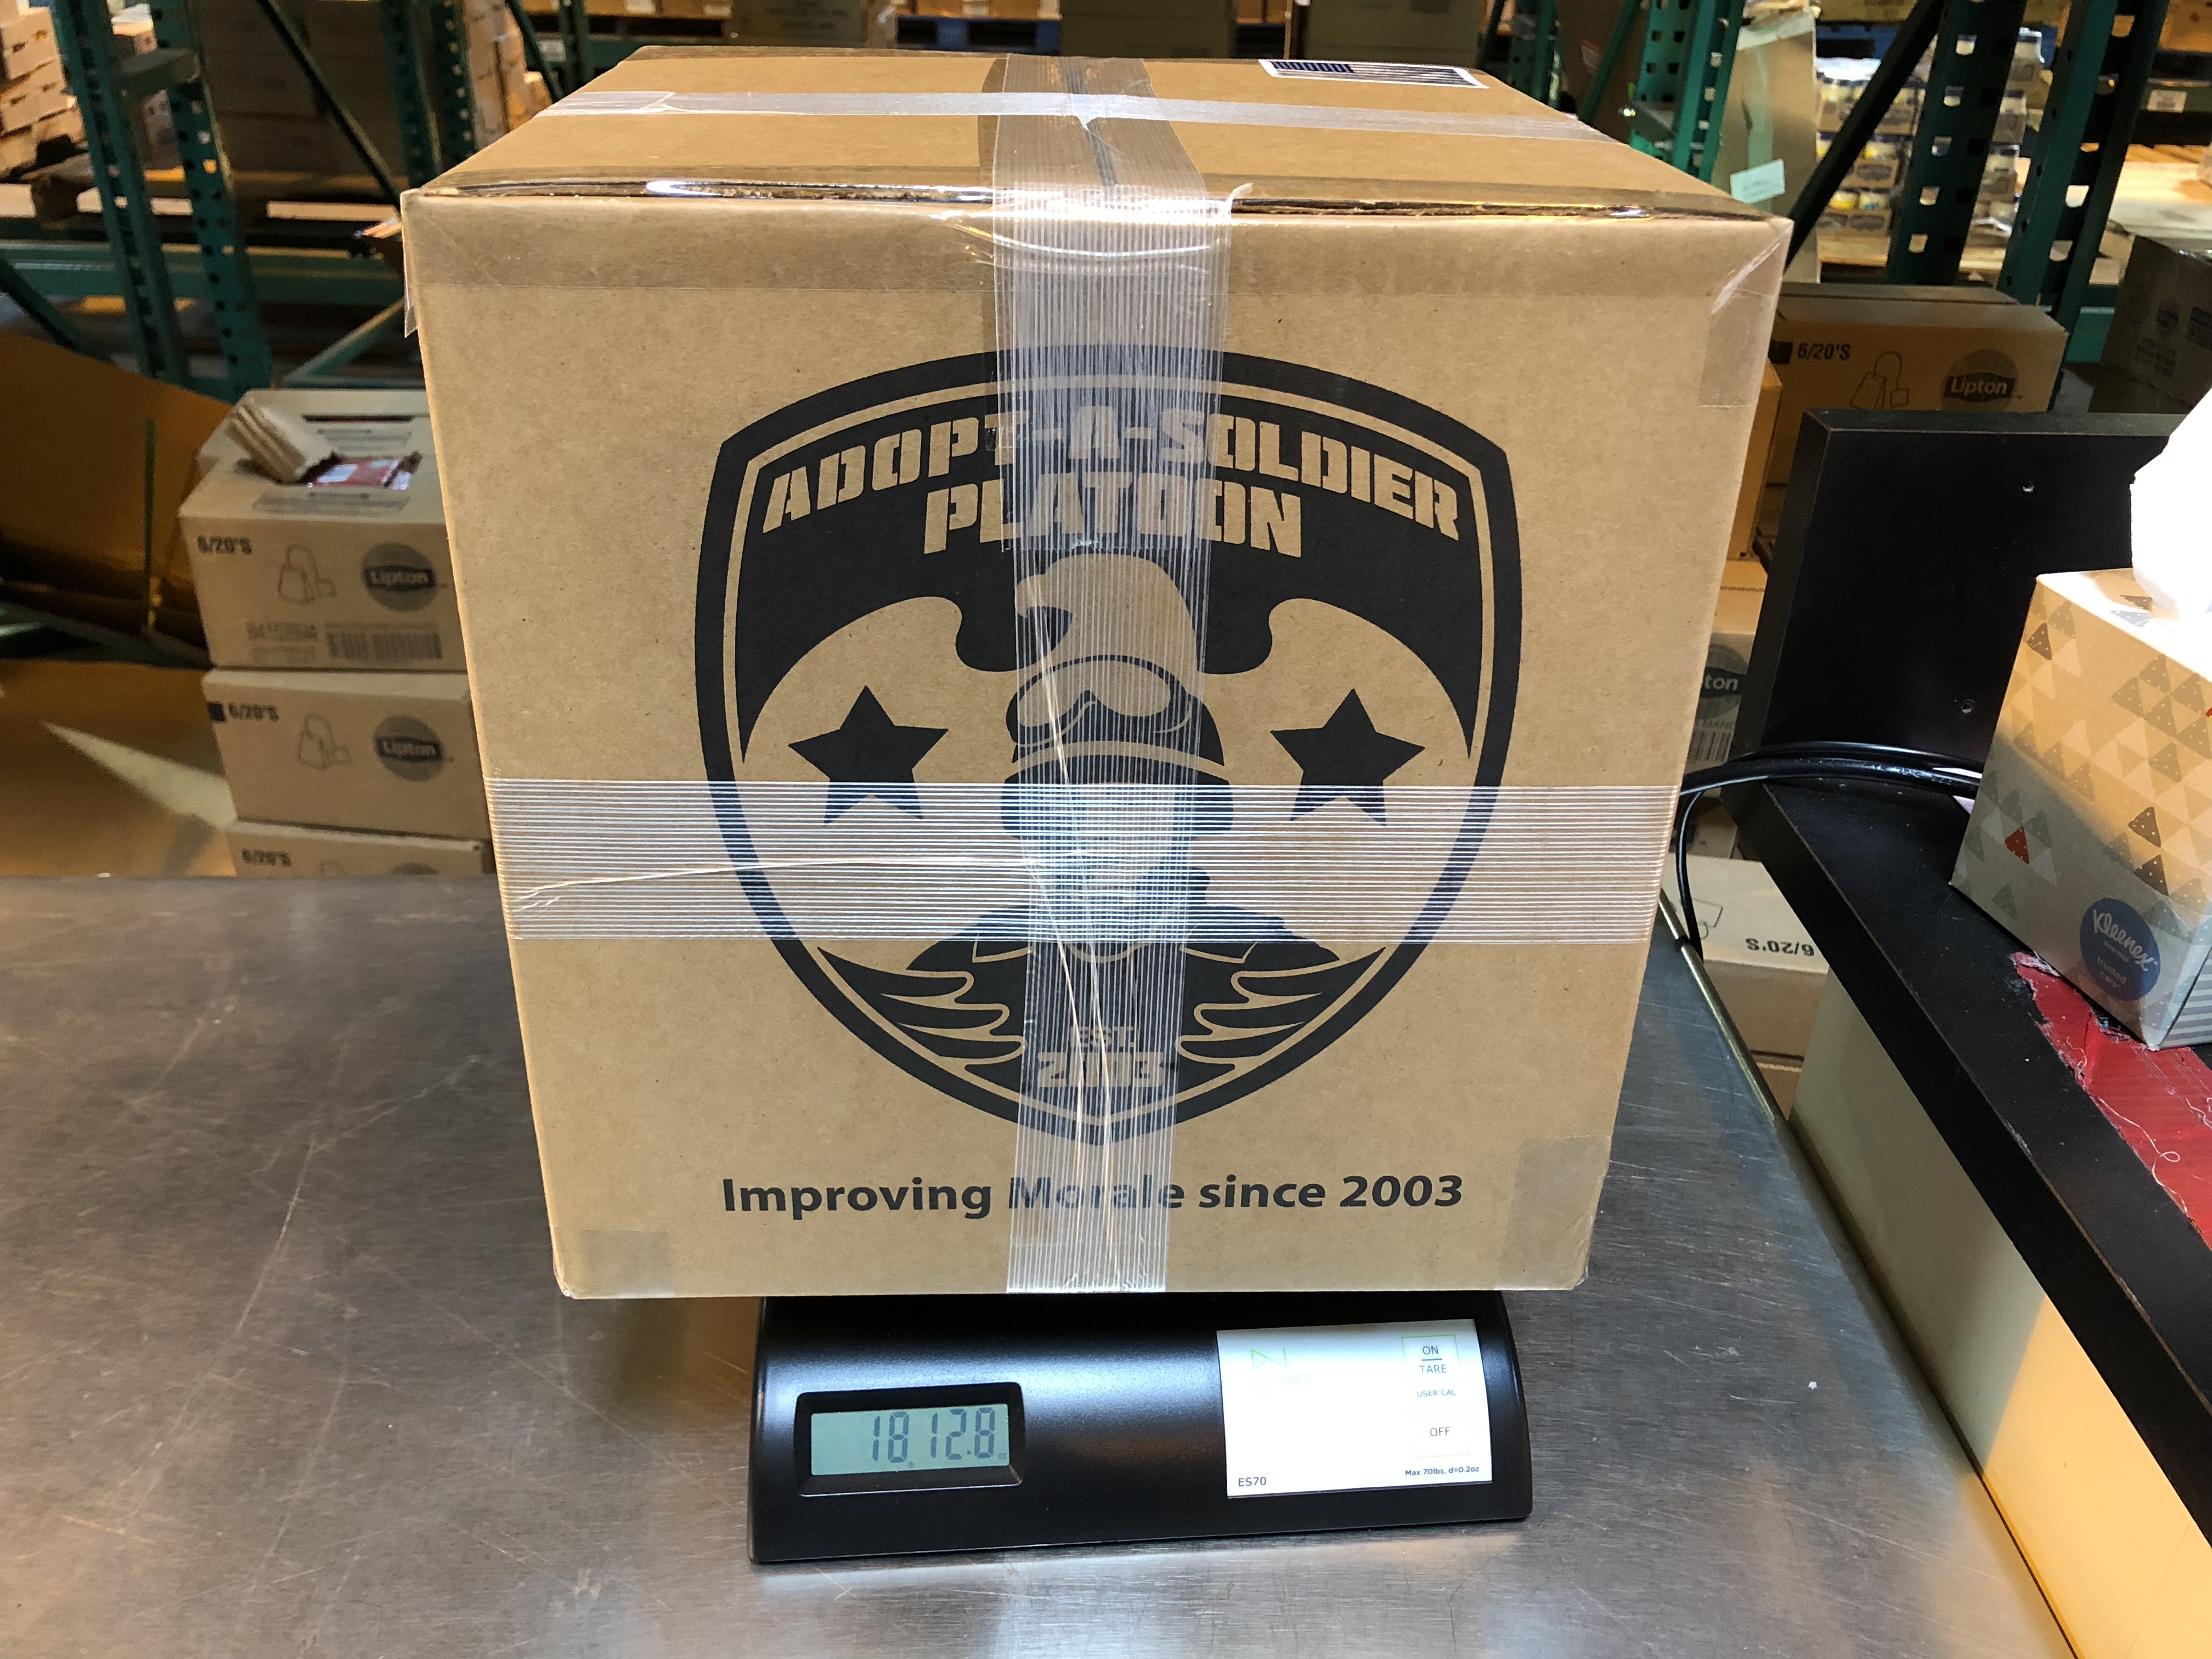 When they see our logo they go for our Boxes!